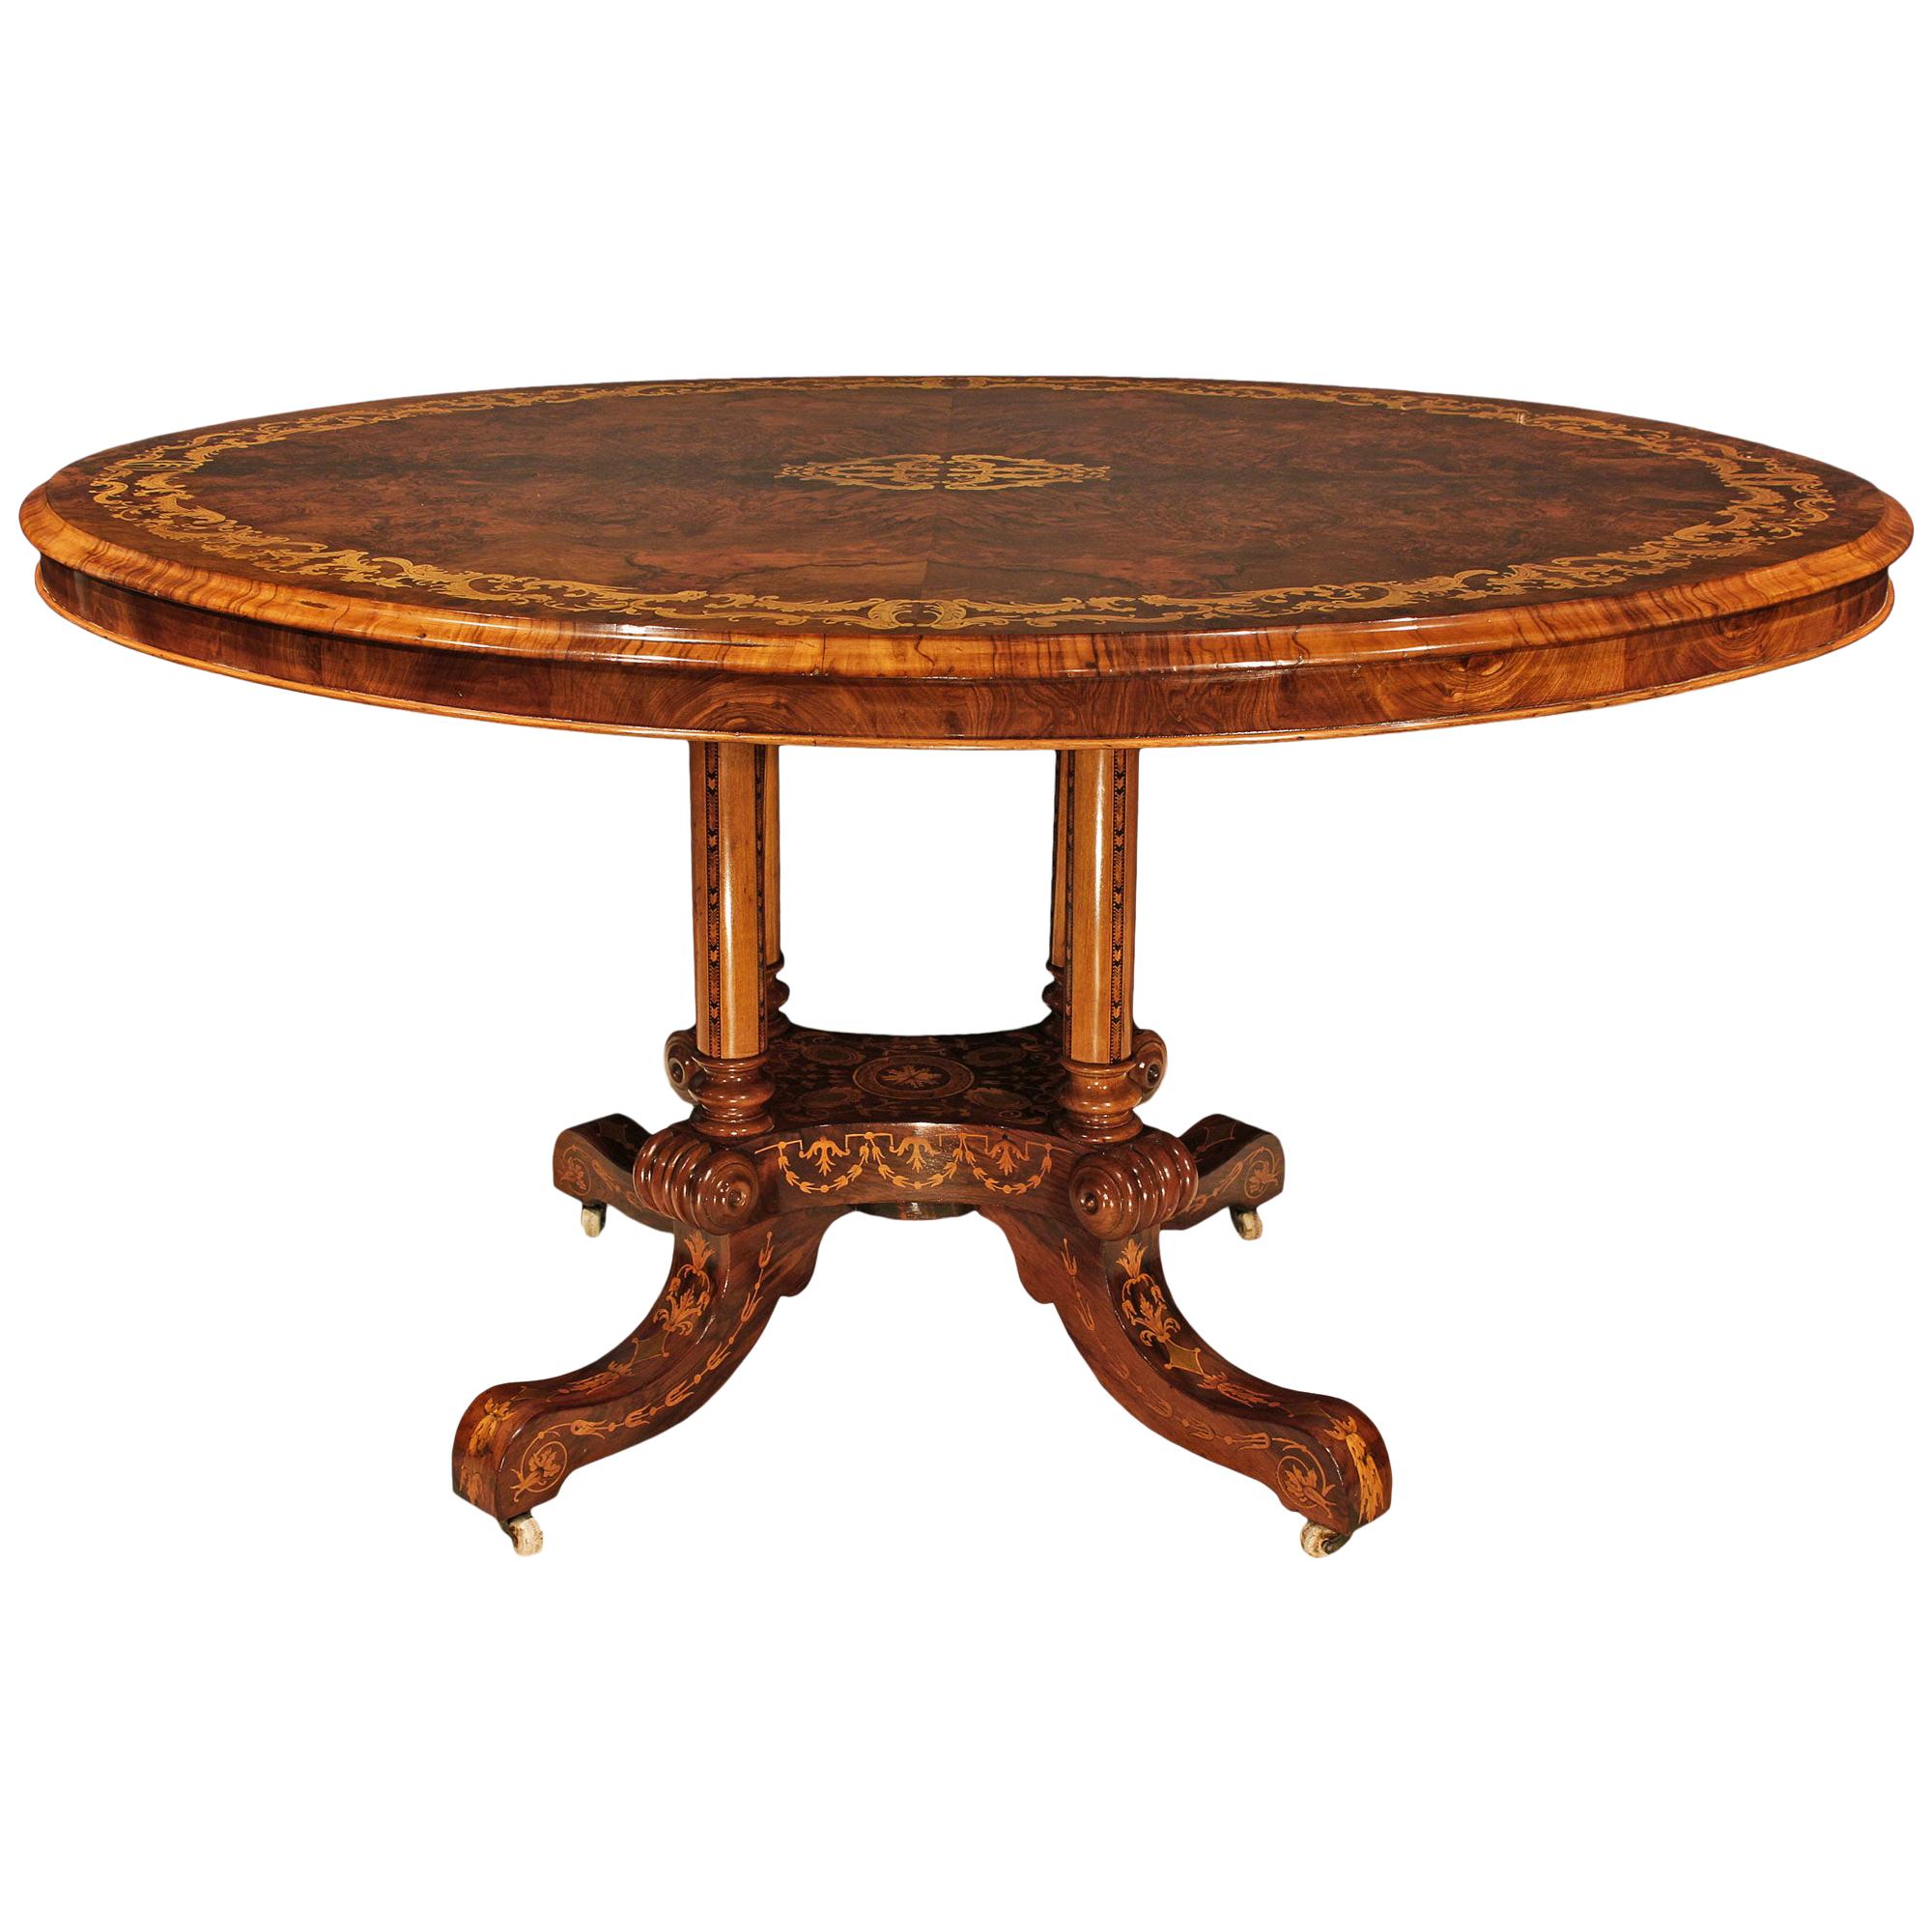 English 19th Century Oval Tilt Top Center Table in Walnut and Exoticwoods For Sale